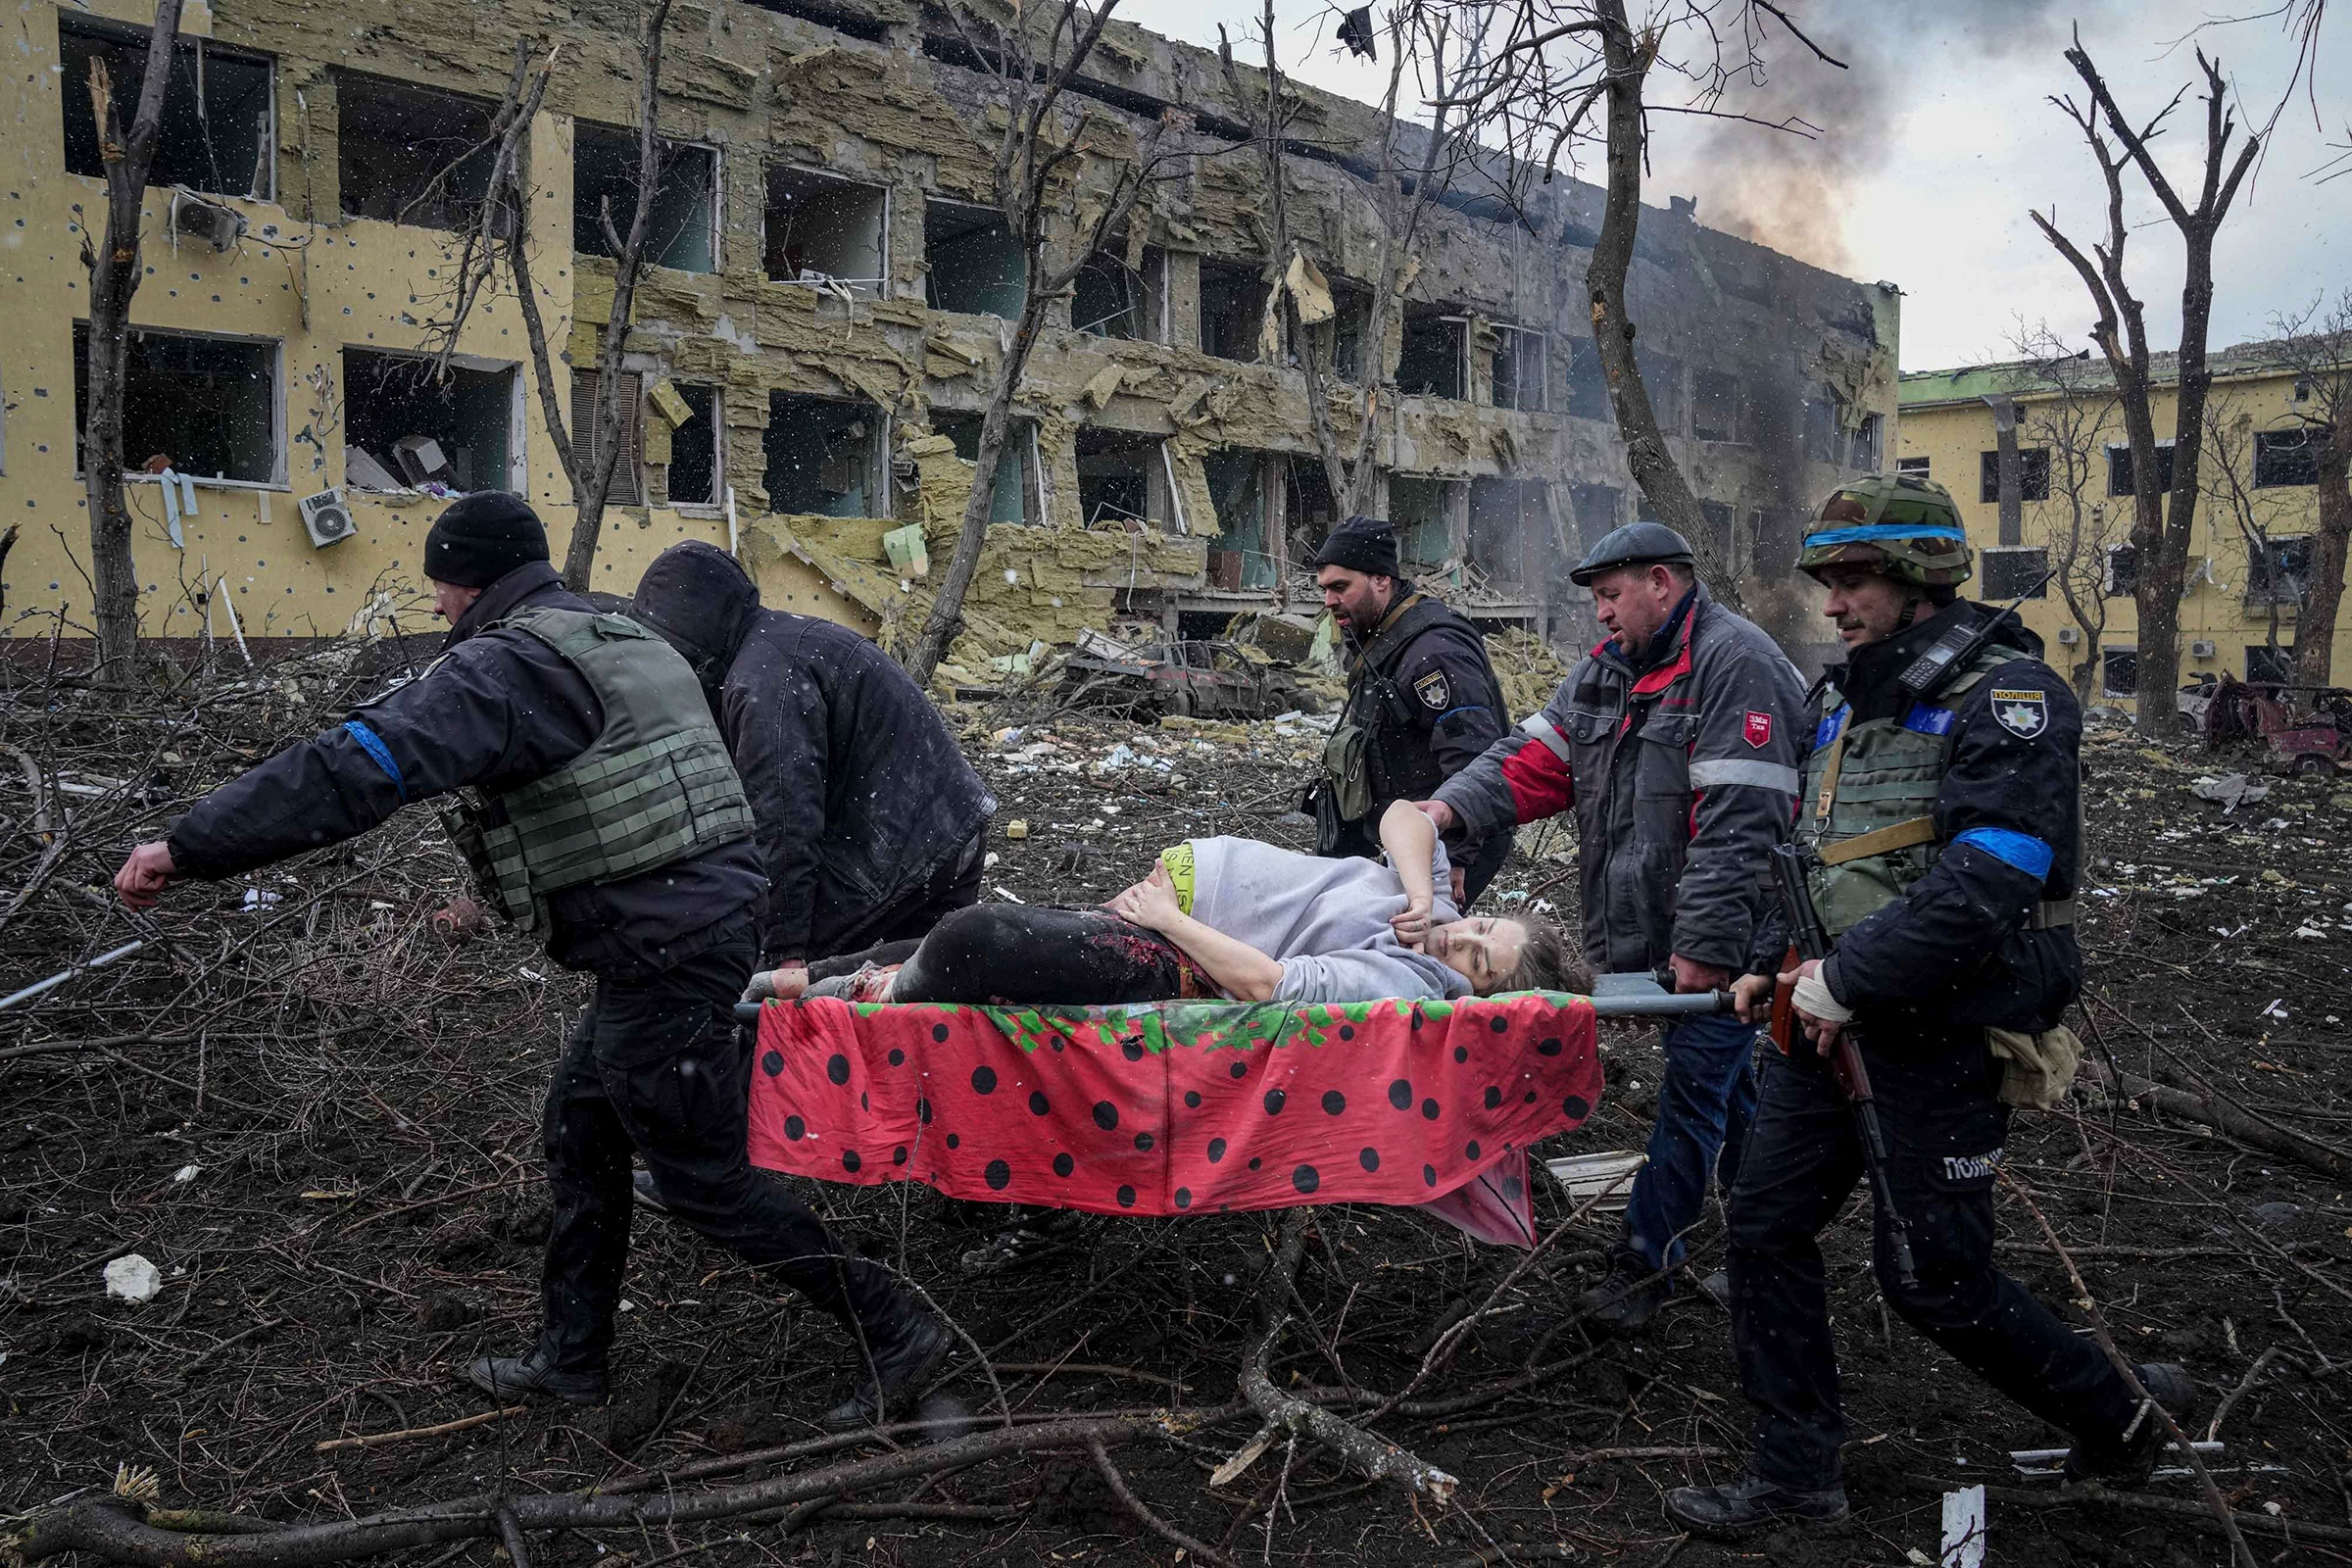 Ukrainian emergency employees and volunteers carry an injured pregnant woman from a maternity hospital damaged by shelling in Mariupol on March 9. The baby was born dead. Half an hour later, the mother died too.